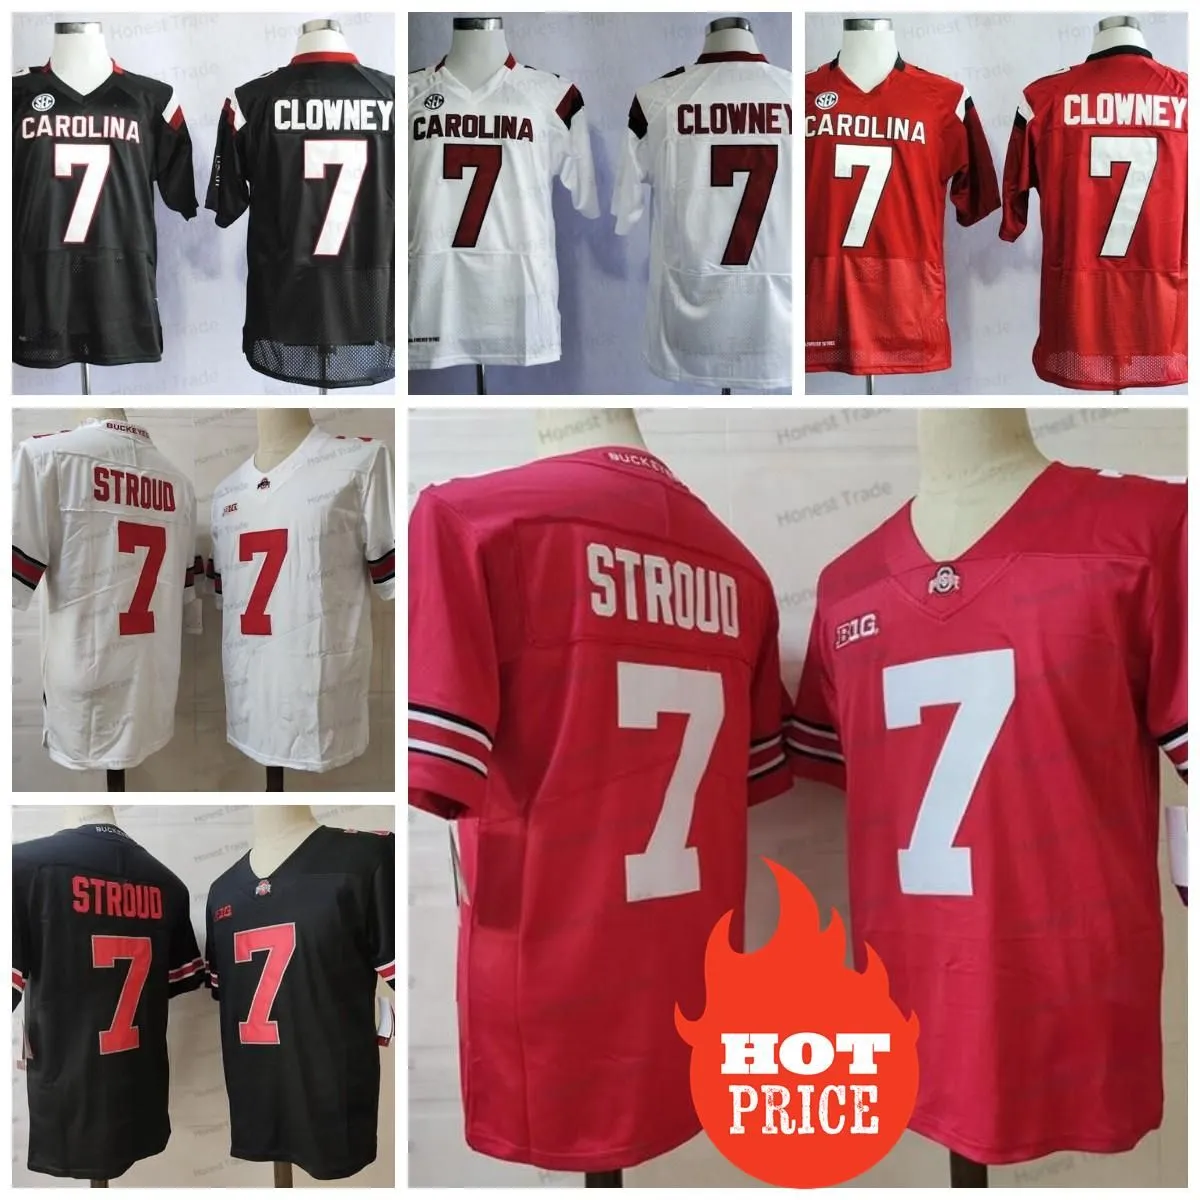 Maillots Maillots de Football NCAA 7 Stroud Football Football Jersey Ohio State Buckeyes 7 Clowney Hommes Blanc Rouge Cousu College Football Jerse